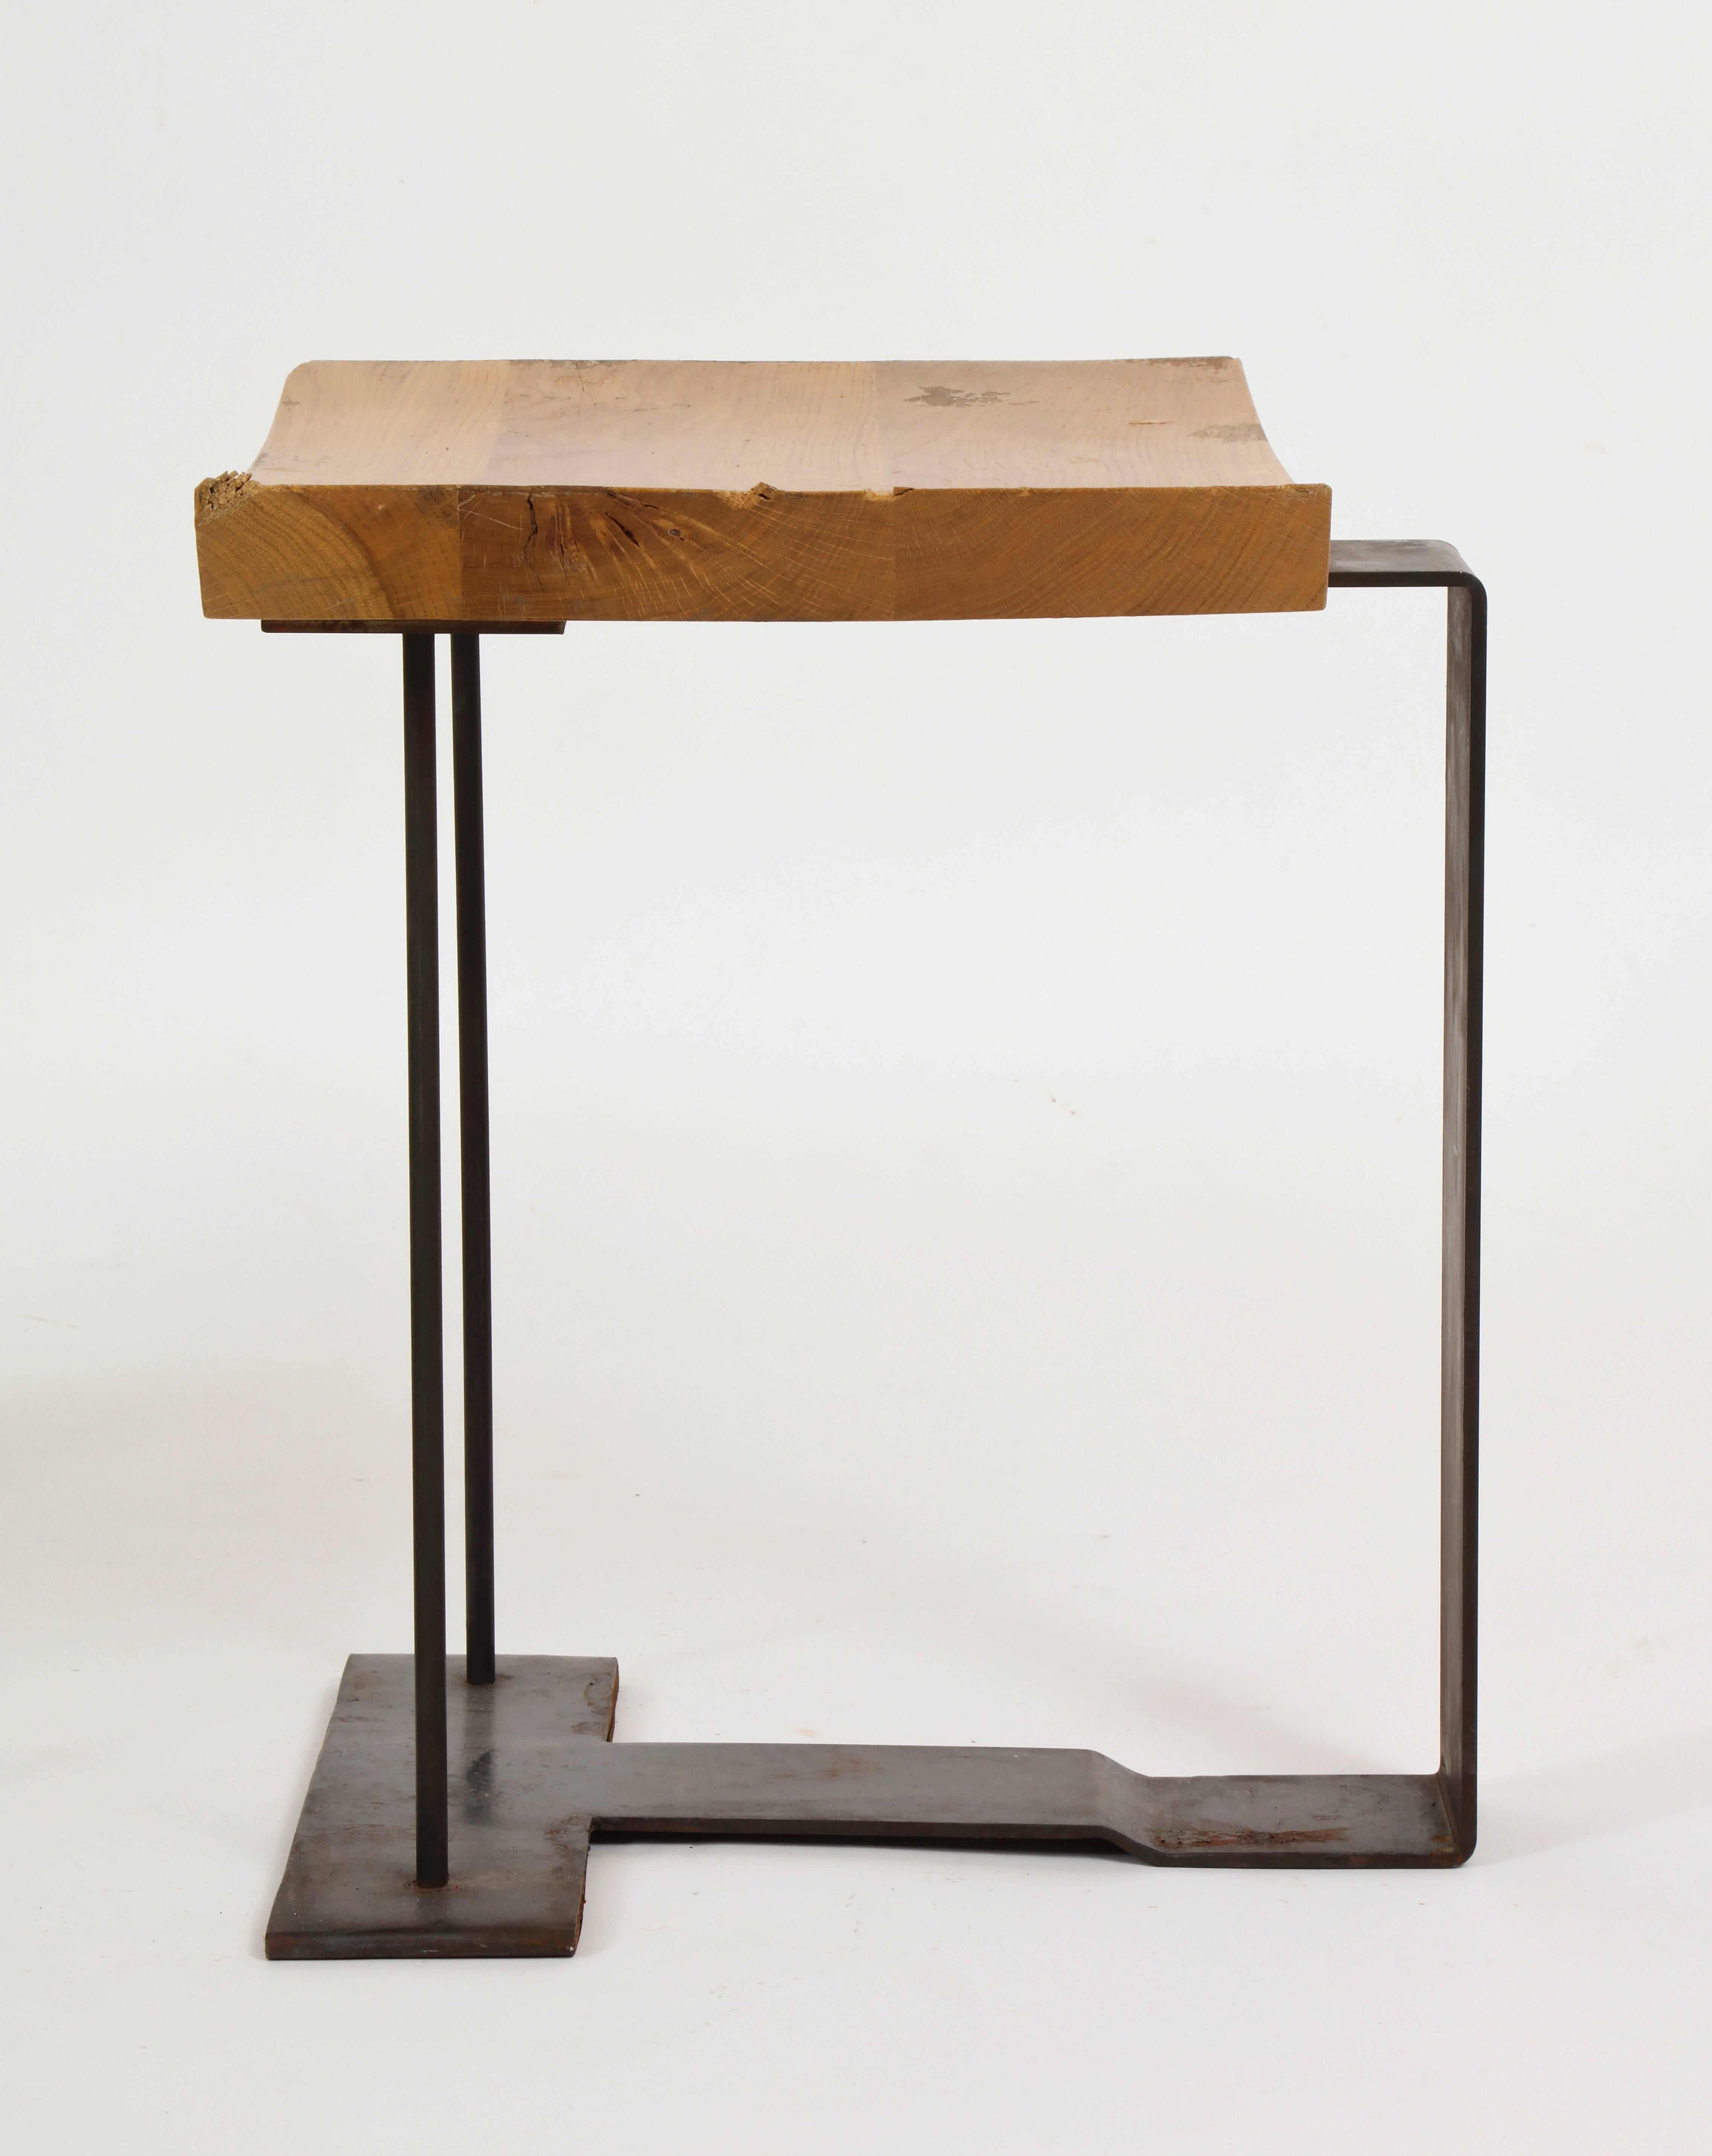 Iron and Wood Stools Tables After Pierre Chareau SN2 France 1920s-1930s Deco In Good Condition In New York, NY